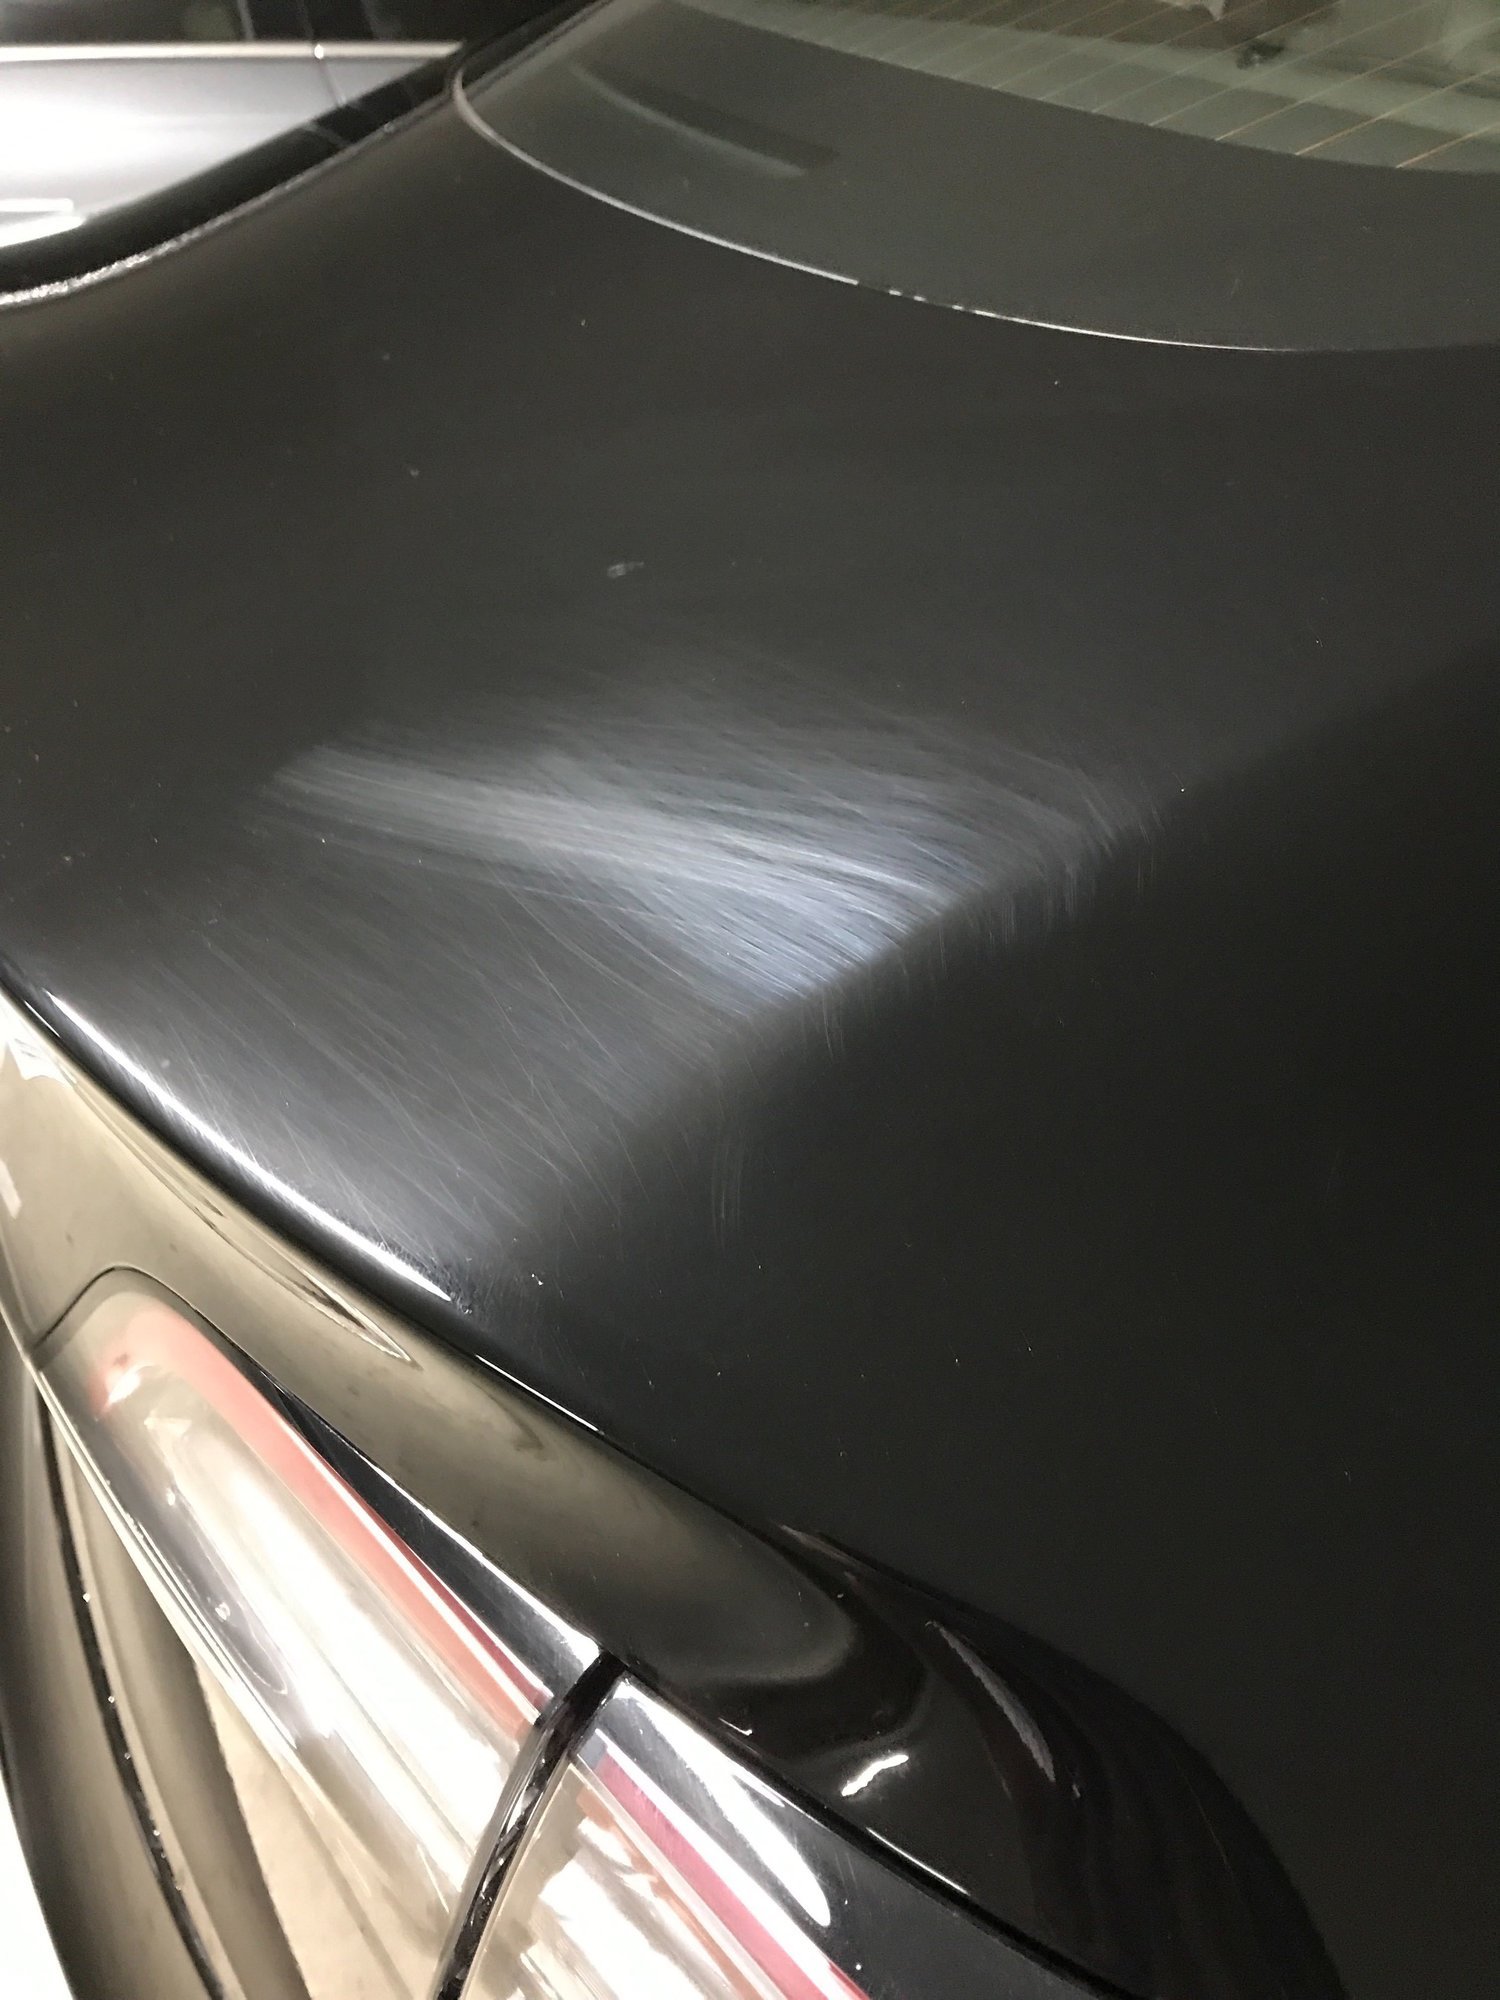 Ultimate Compound messed up my paint - Car Care Forums: Meguiar's